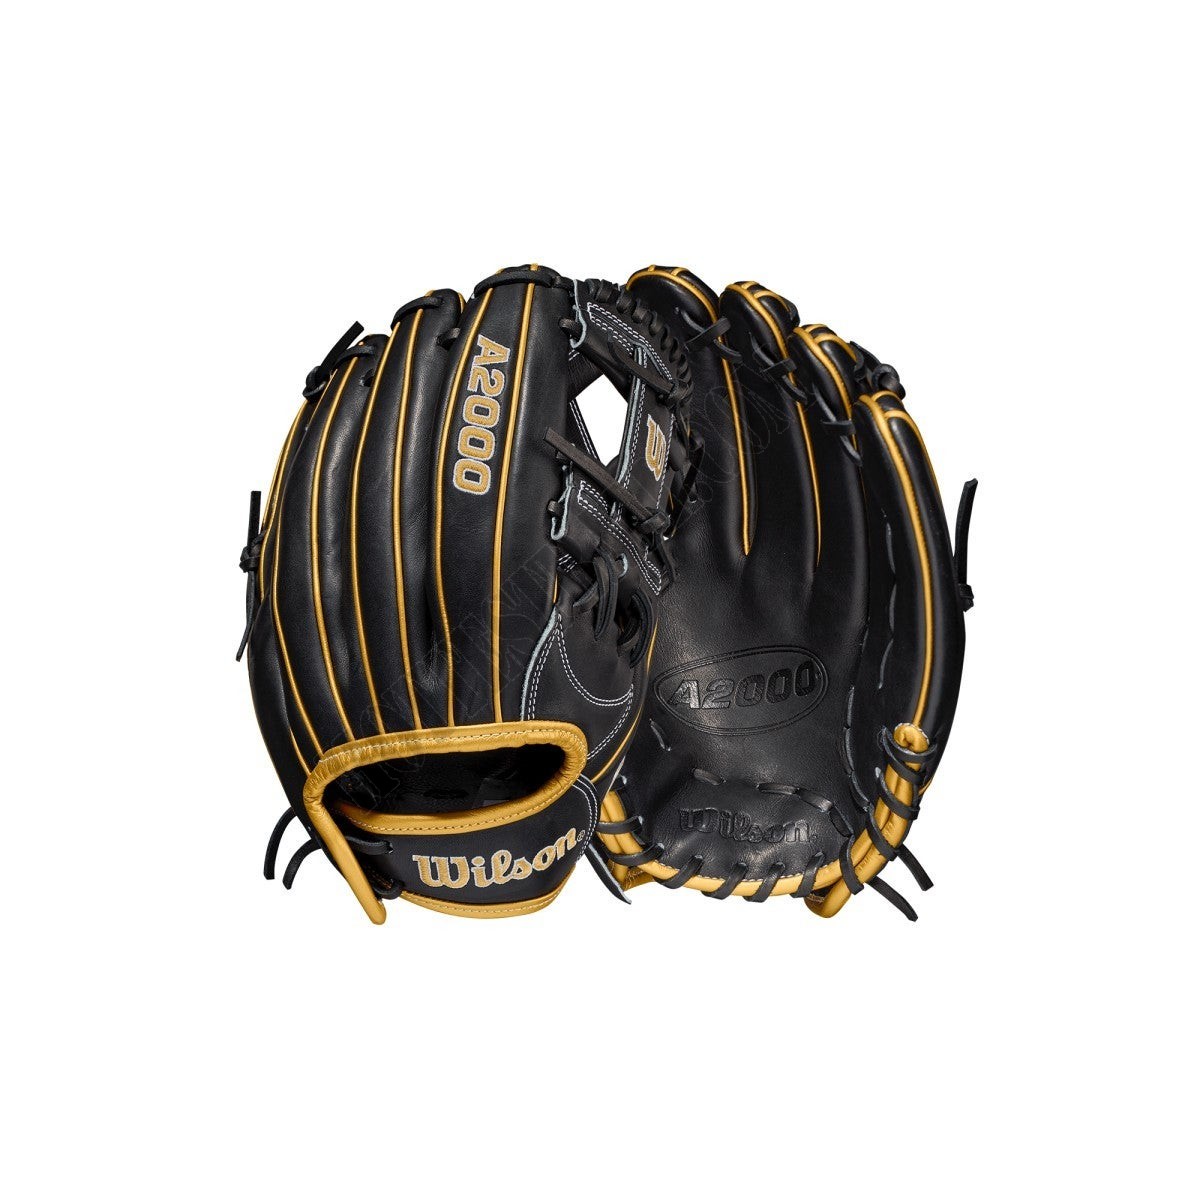 2021 A2000 H75 11.75" Infield Fastpitch Glove ● Wilson Promotions - 2021 A2000 H75 11.75" Infield Fastpitch Glove ● Wilson Promotions